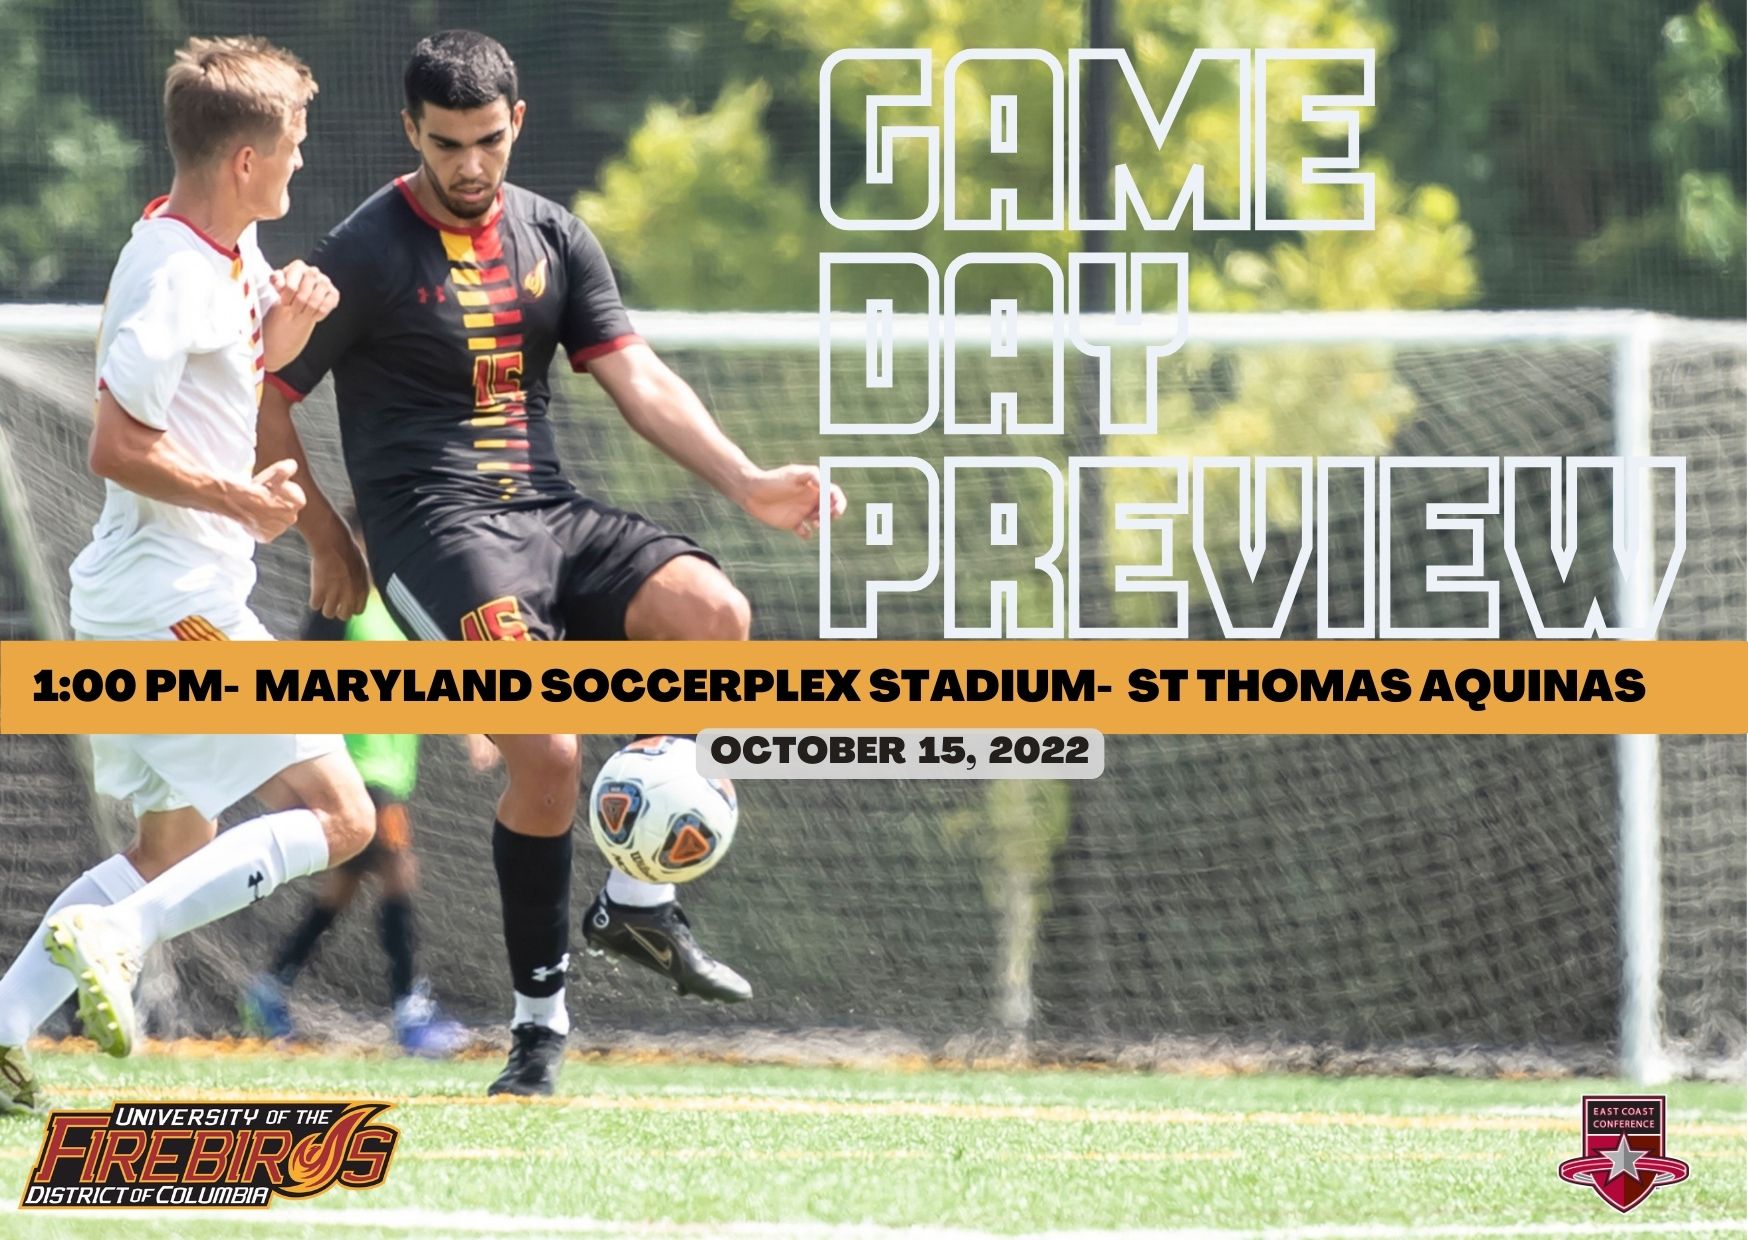 MEN'S SOCCER: GAME DAY PREVIEW 10/15